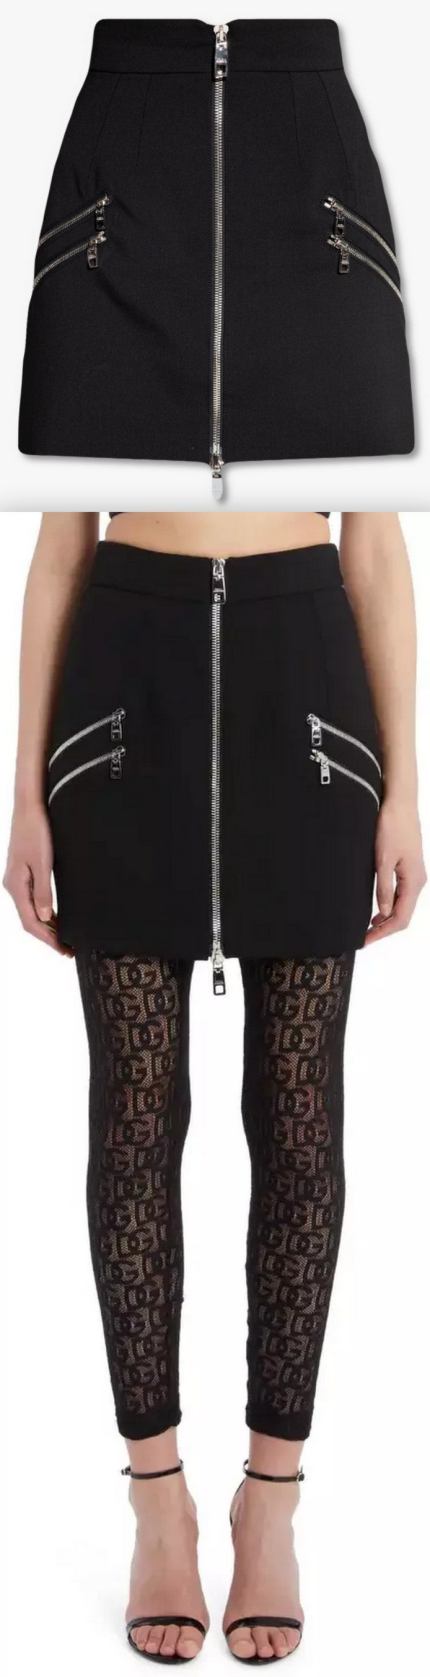 Black Mini Skirt with Zippers Inspired Fashions Boutique